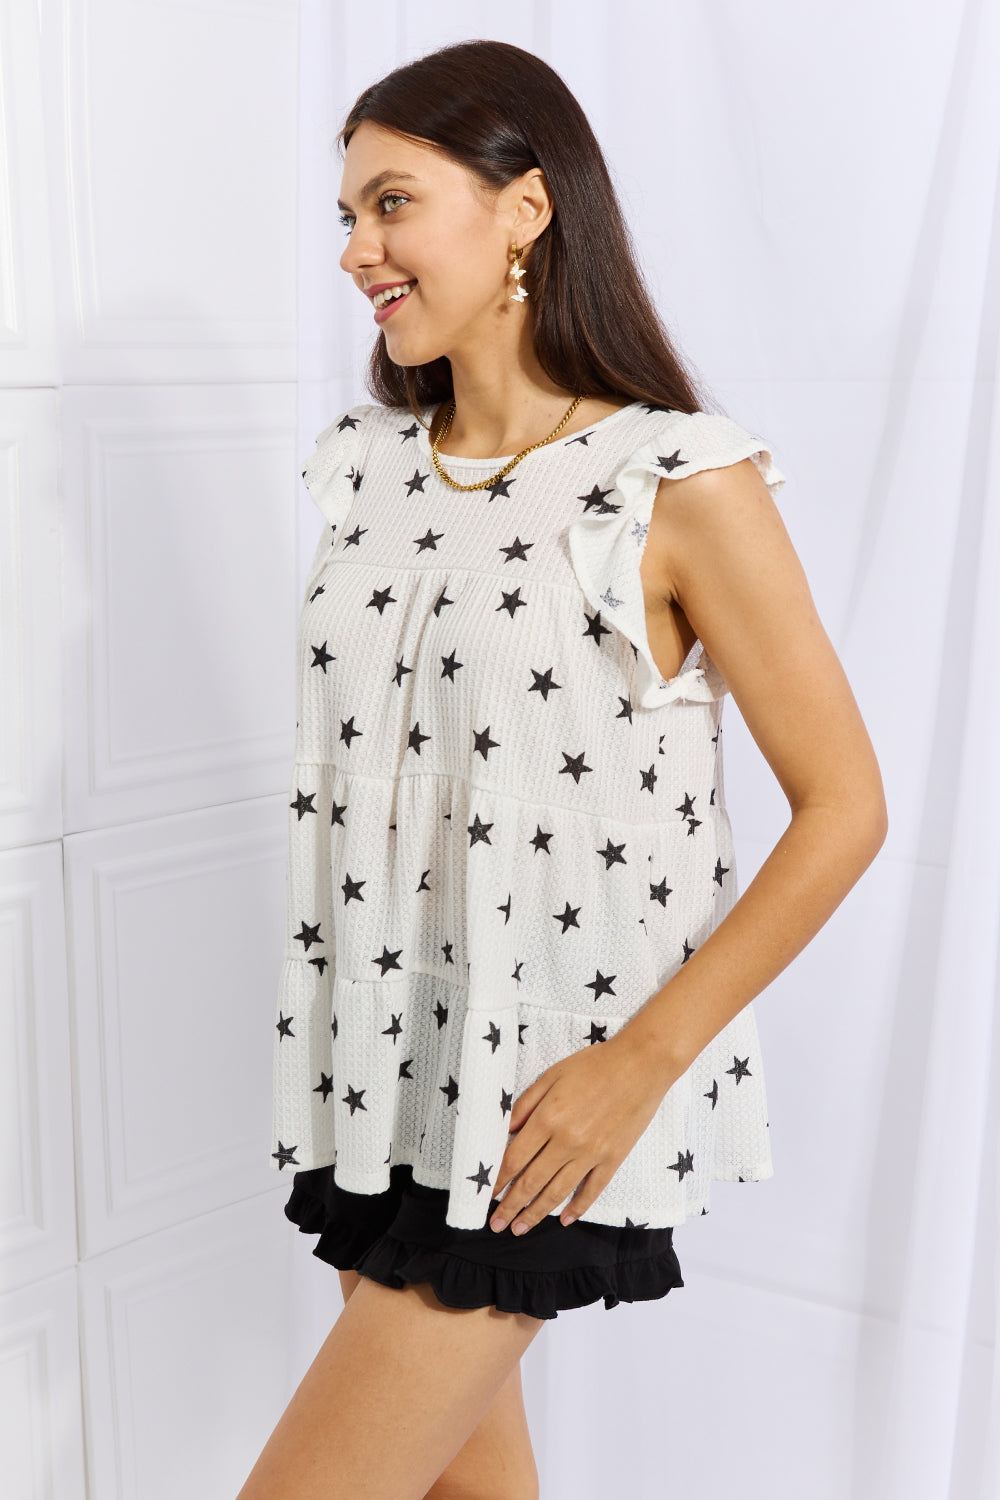 Shine Bright Full Size Butterfly Sleeve Star Print Top